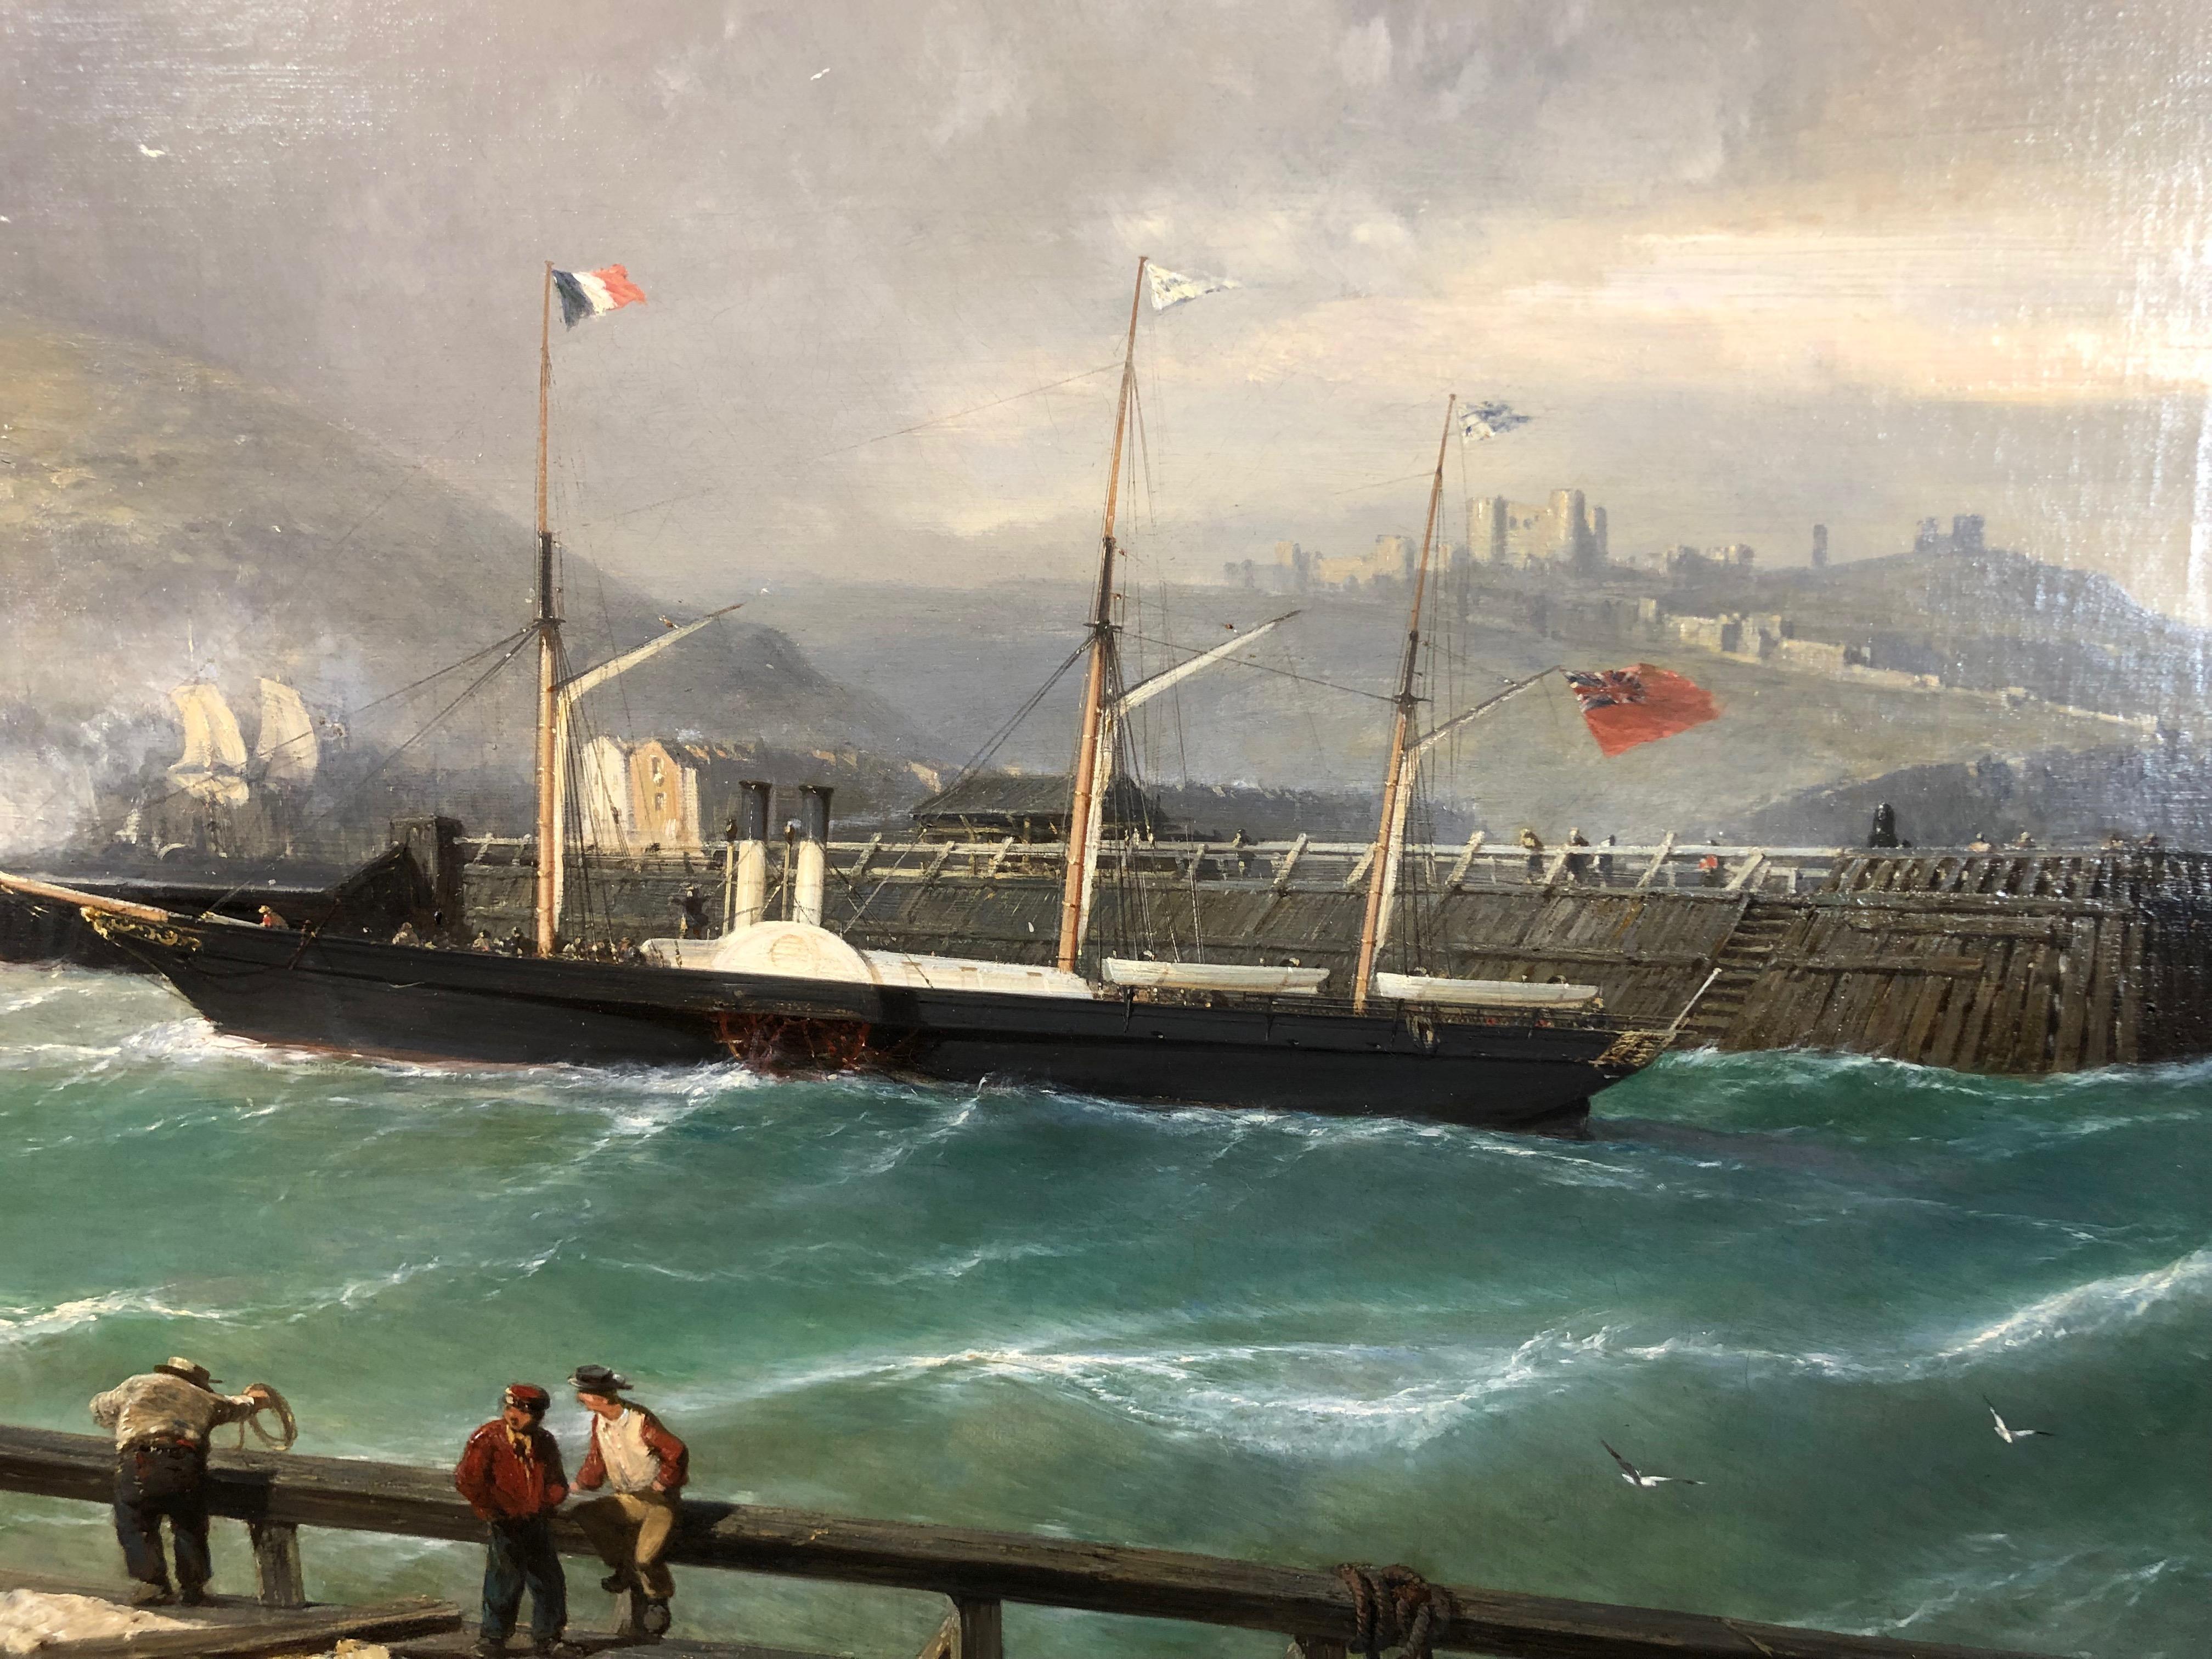 Julius Hintz was born in Hamburg in 1805 where he studied under Siegfried Bendixon. In 1840 he moved to Paris, studying with Louis Isabey, exhibiting at the Paris Salon. On his visits to England he became fascinated by the Port of Dover, how the